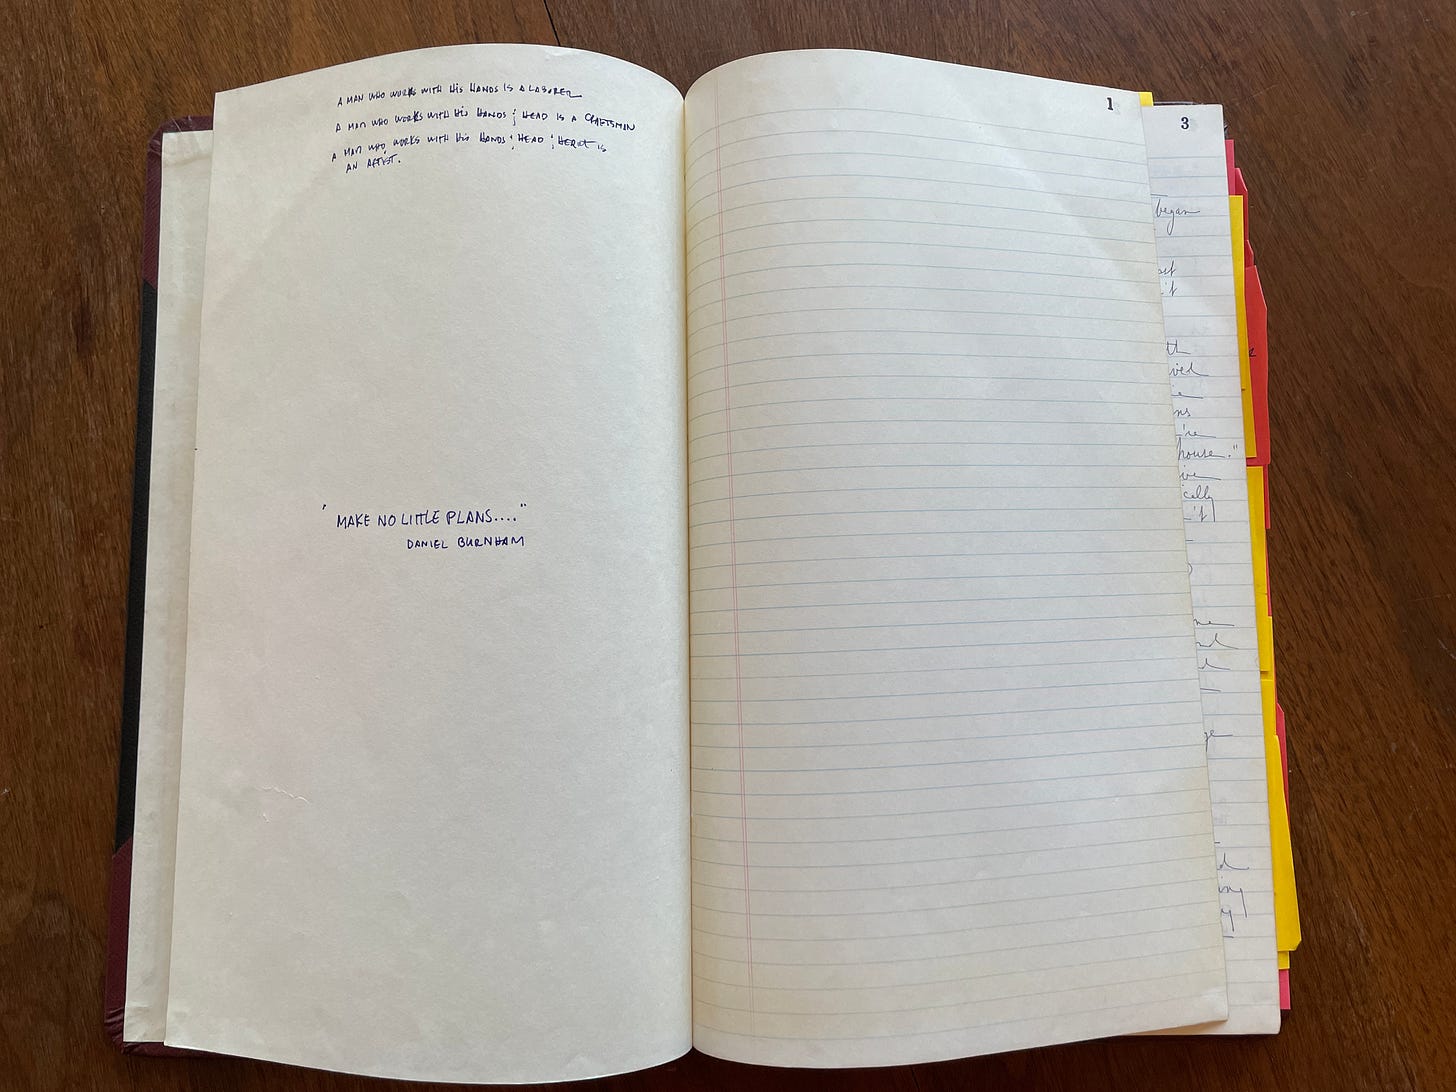 Open notebook with handwritten inscription on the left side. The right page is blank.